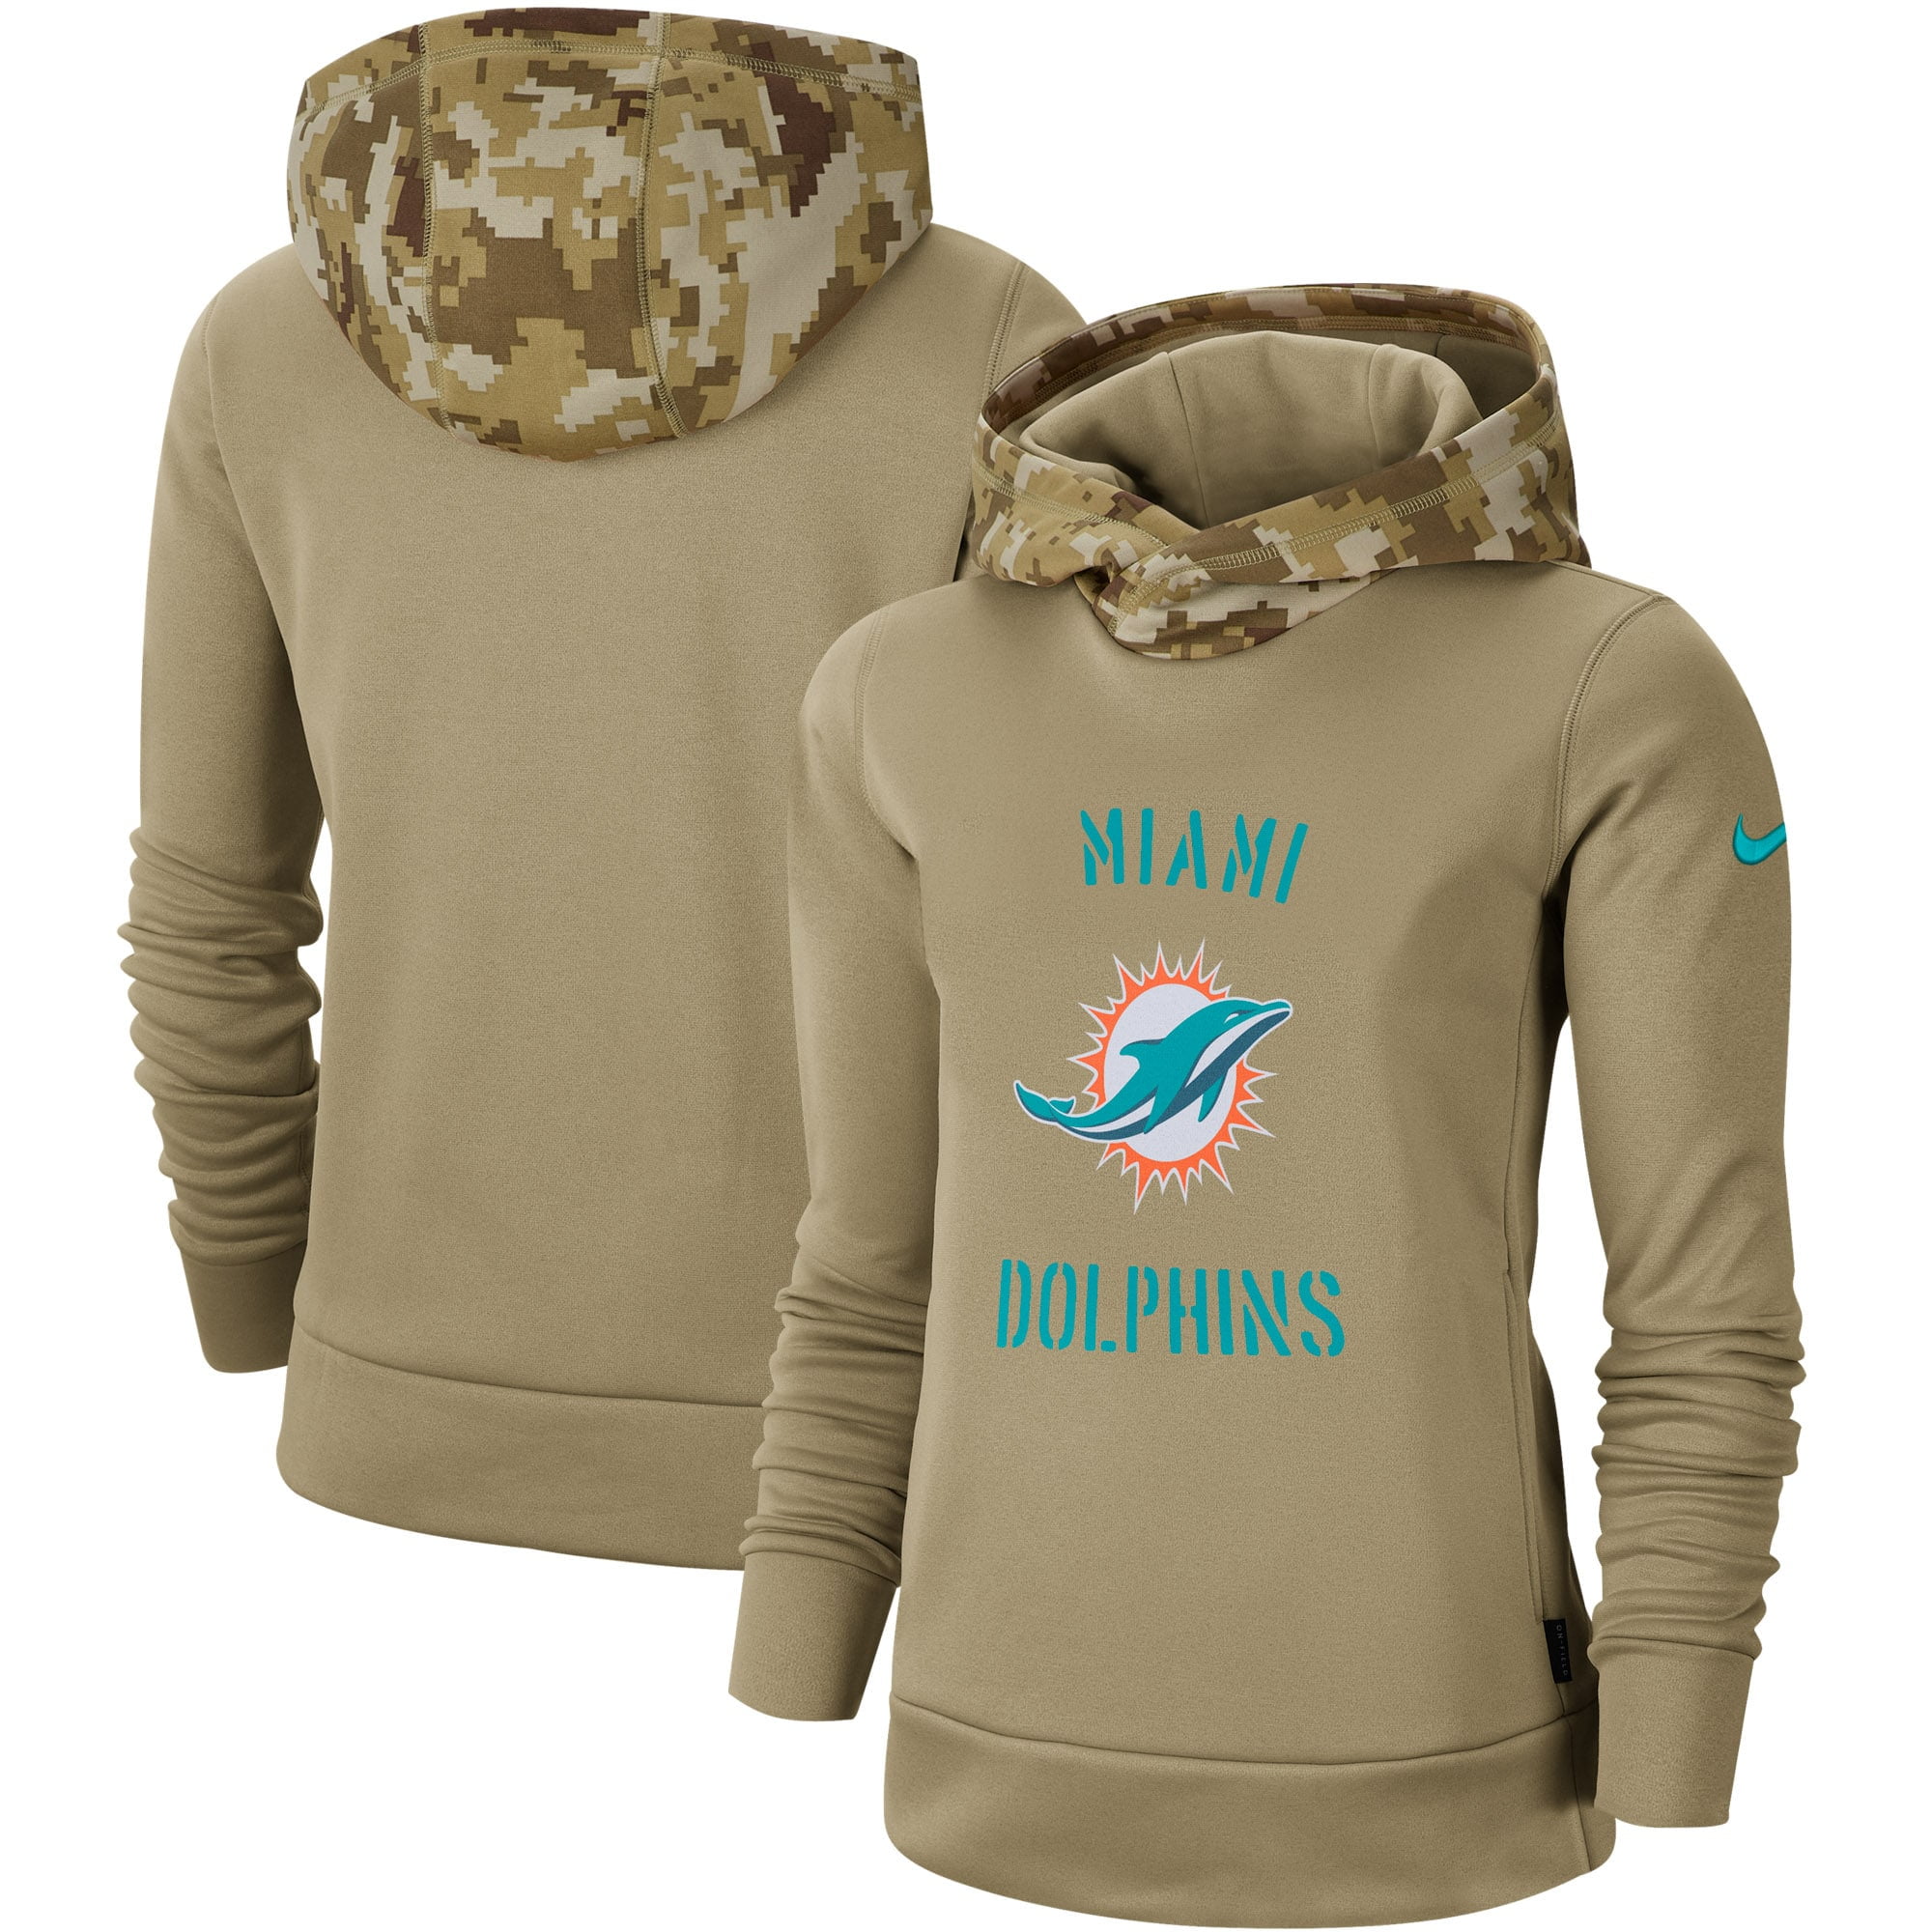 nfl support our troops sweatshirt